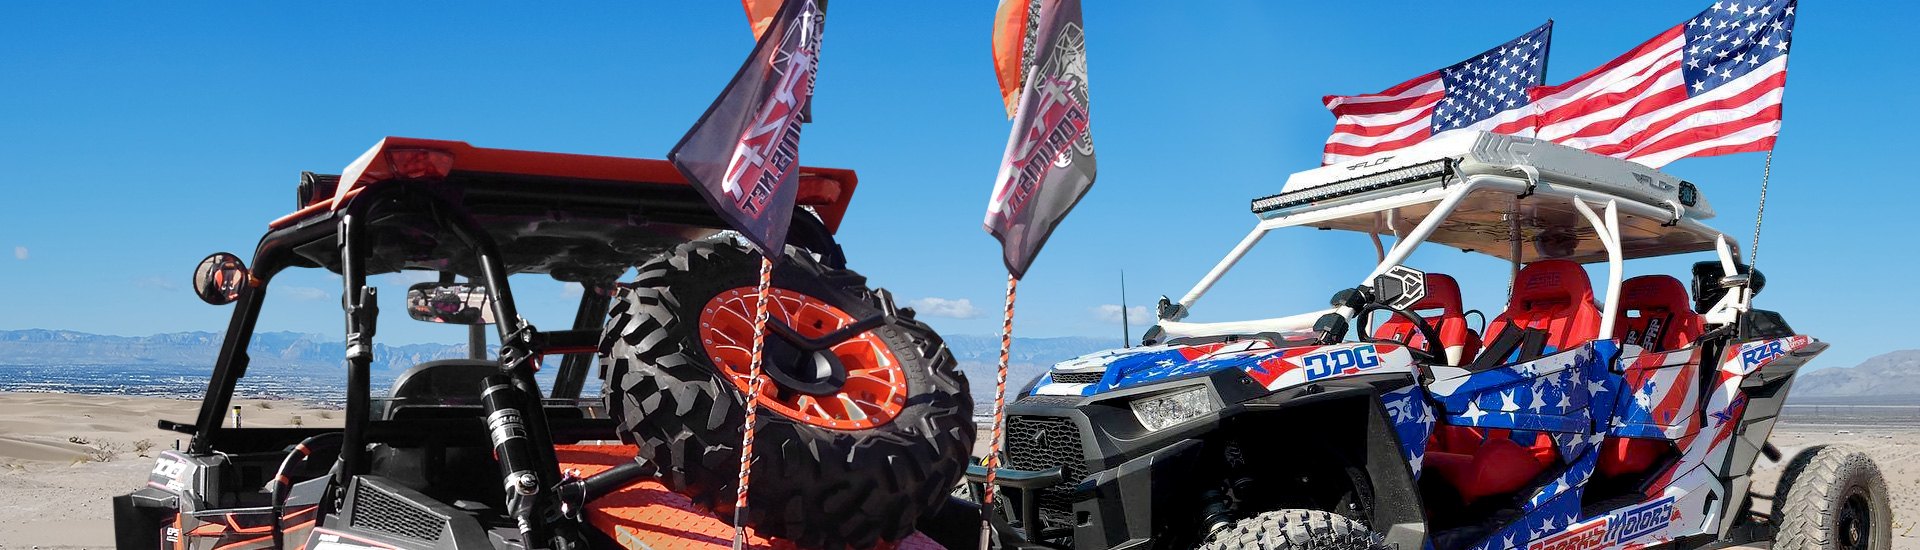 Powersports Flags, Banners & Signs